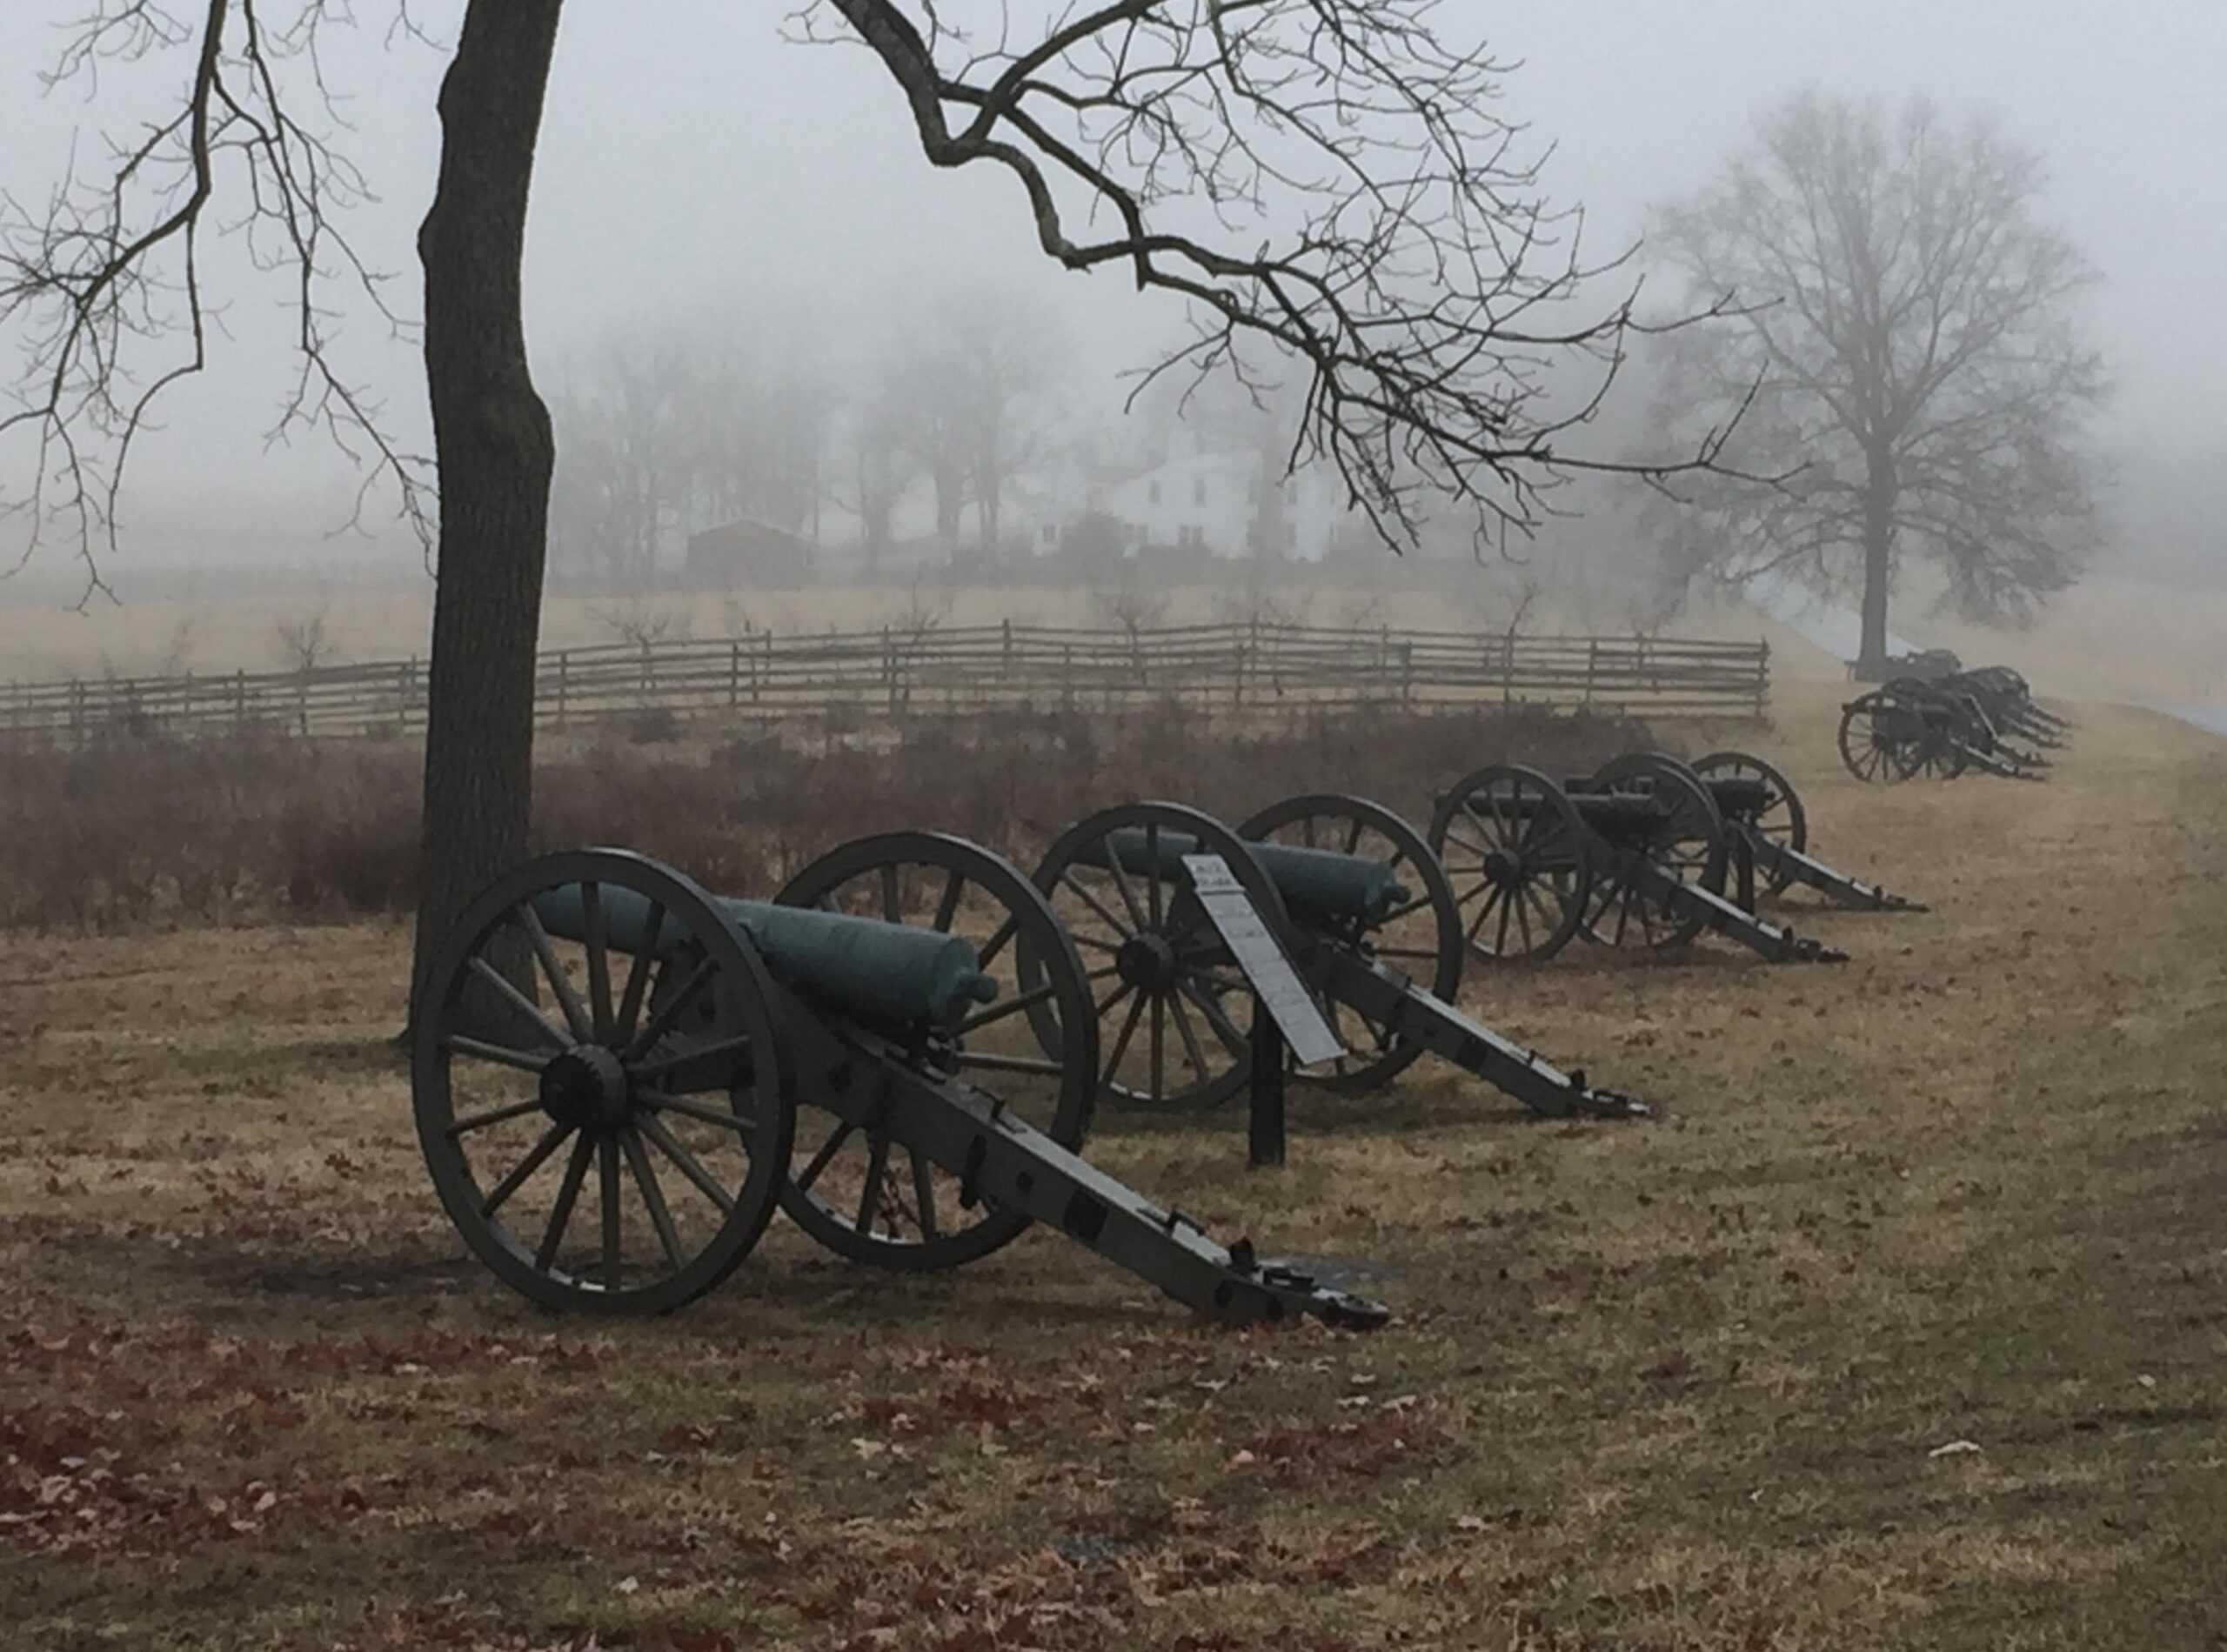 Battle of Gettysburg | Cannons in the Mist